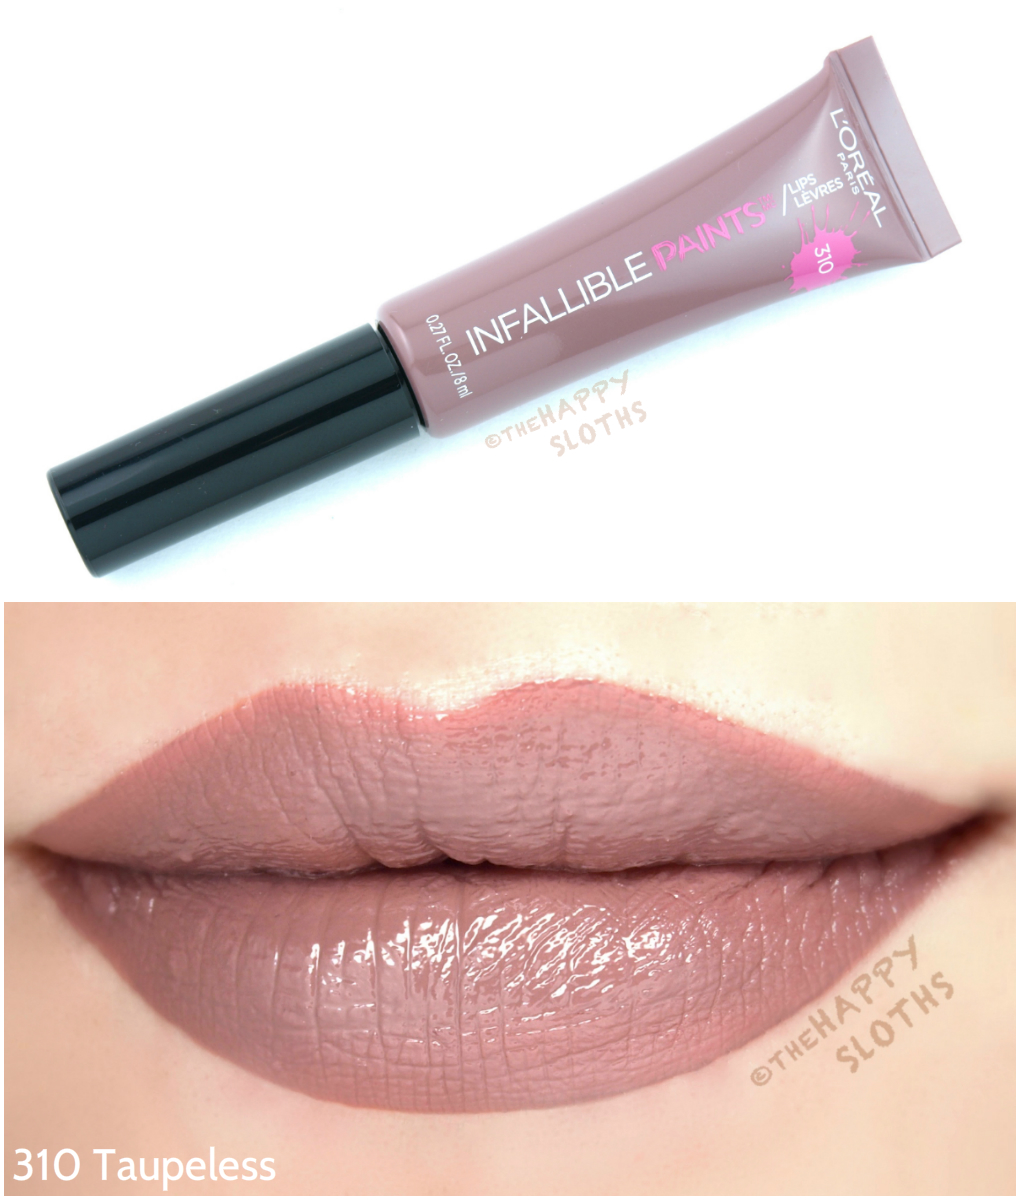 L'Oreal Infallible Lip Paints 310 Taupeless